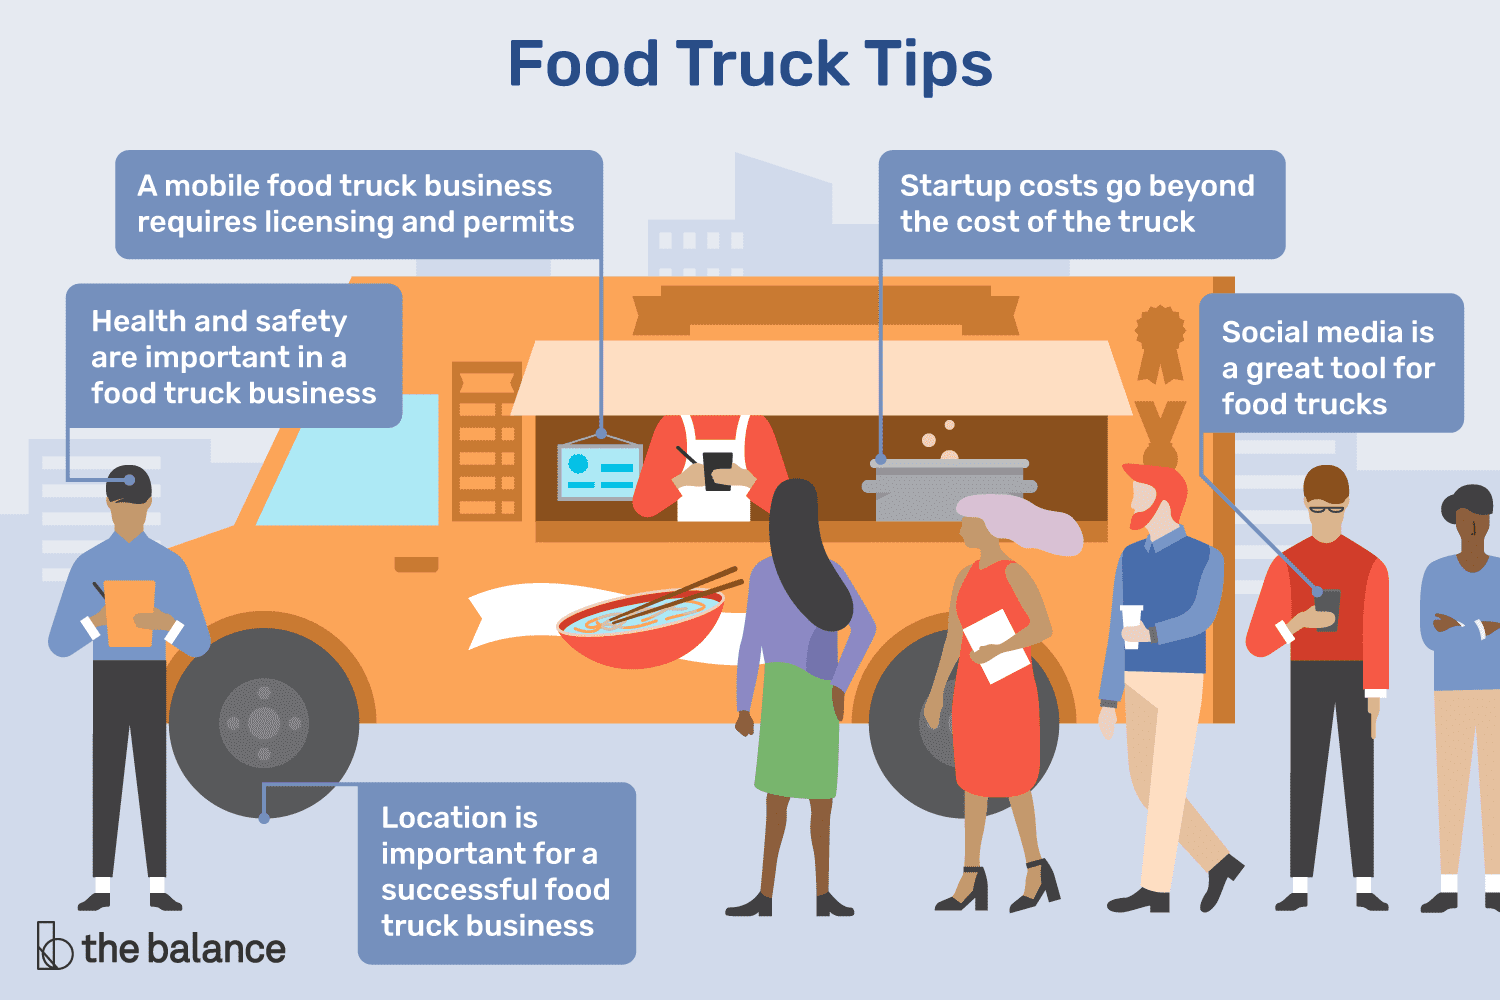 5 tips for future food truck owner